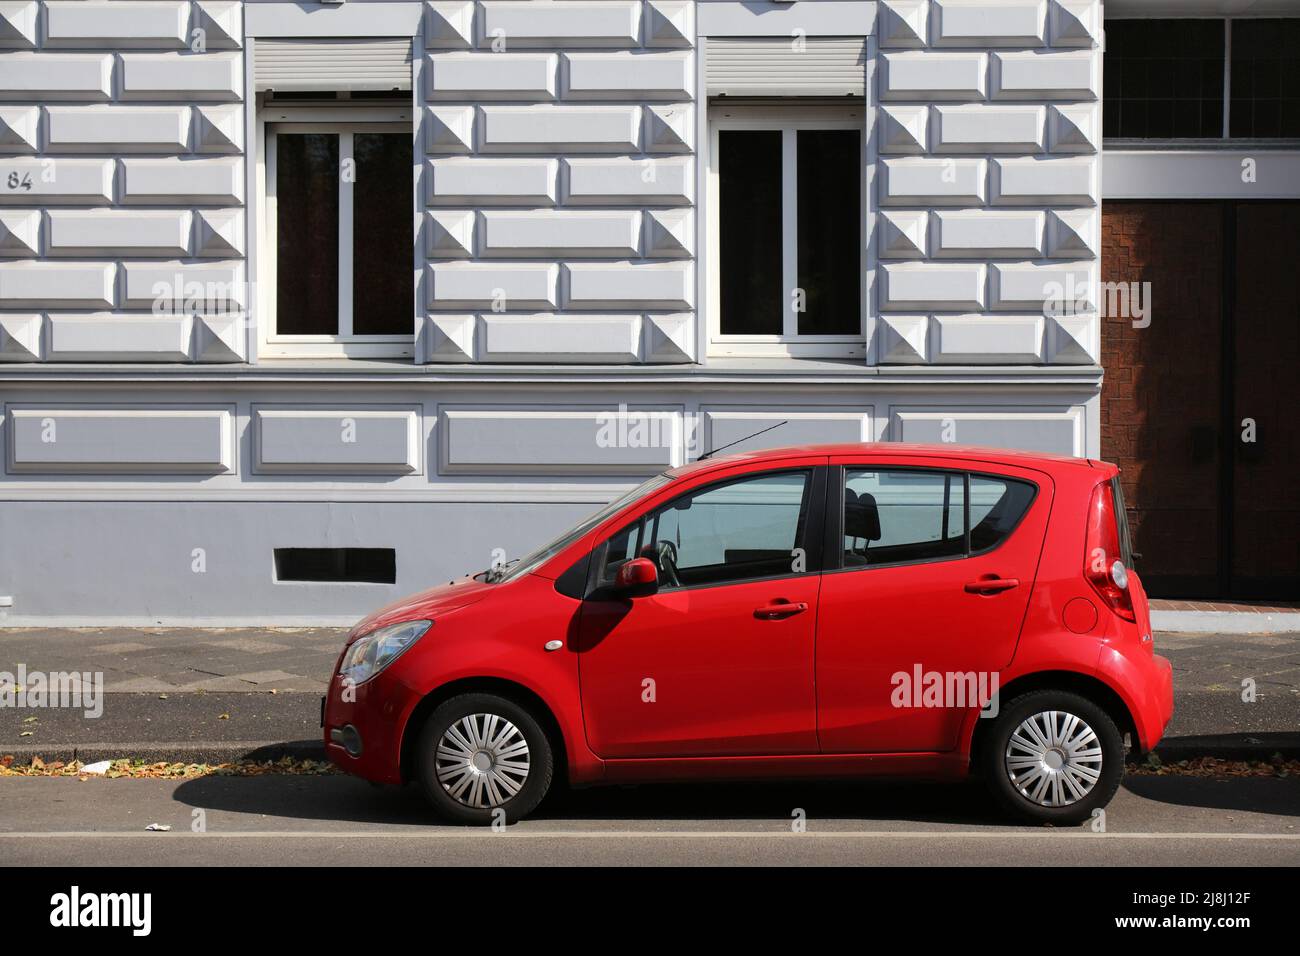 NORTH RHINE-WESTPHALIA, GERMANY - SEPTEMBER 16, 2020: Opel Agila hatchback city car parked in Germany. There were 45.8 million cars registered in Germ Stock Photo